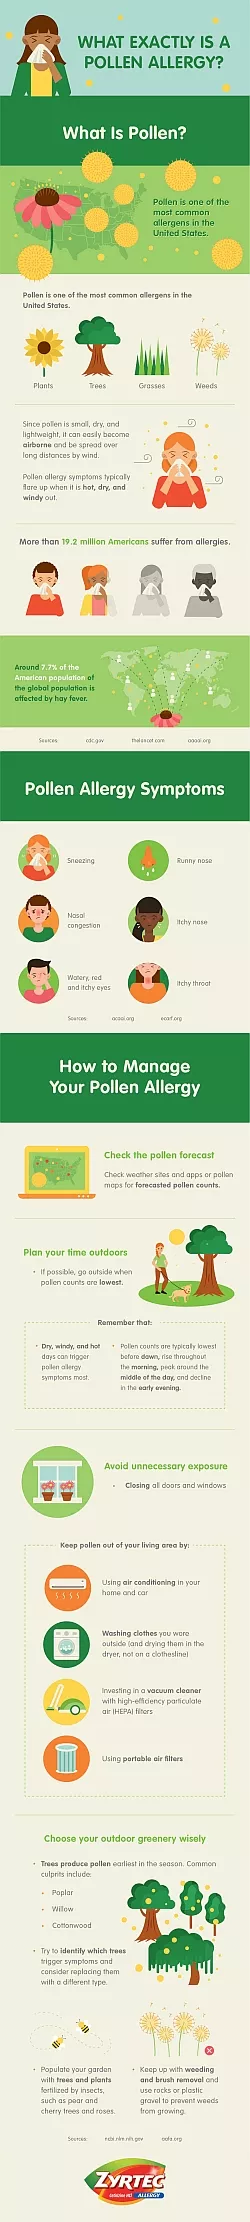 What is a pollen allergy